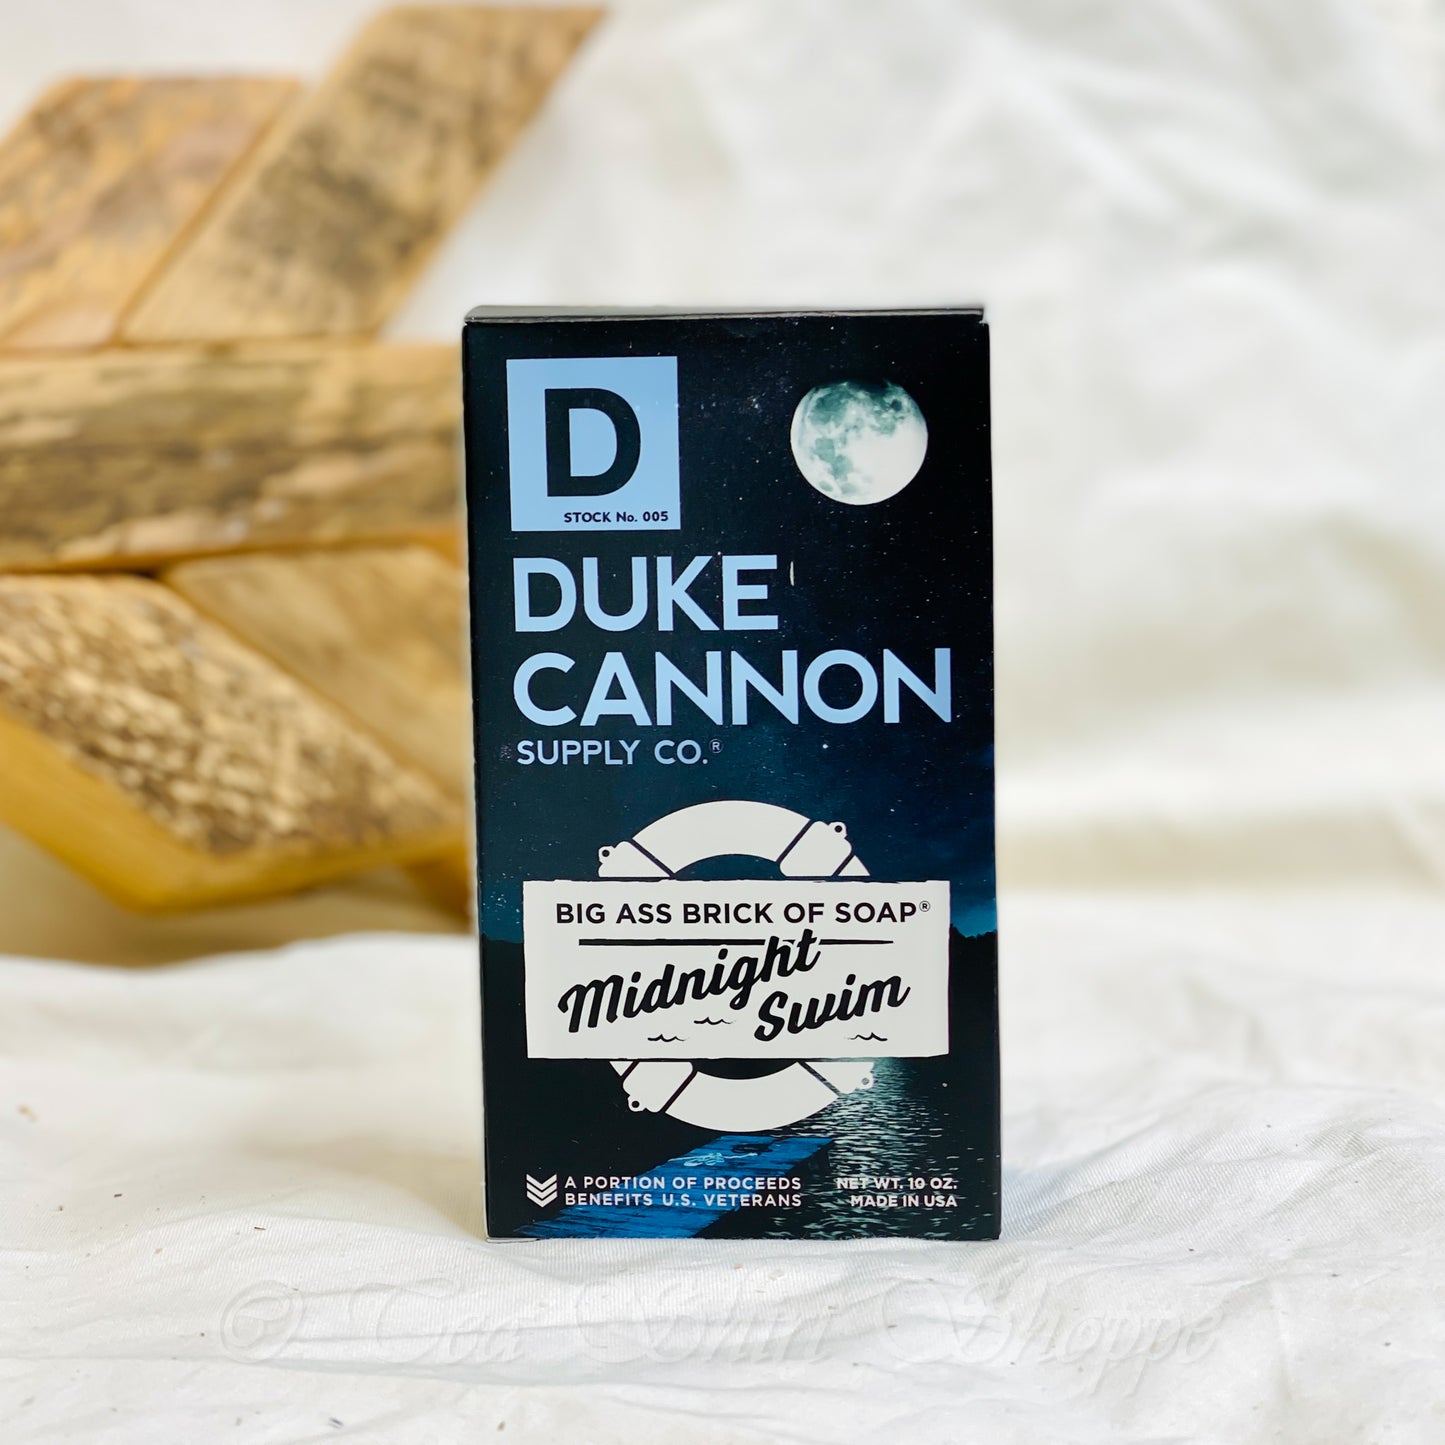 No, Duke Cannon’s idea of aquatic refreshment is a moonlit cannonball into the crystal blue water of a remote forest lake. Experience the refreshing blend of pure water, fresh air, and crisp greens with this American made soap inspired by the invigorating adventure of a midnight swim. 